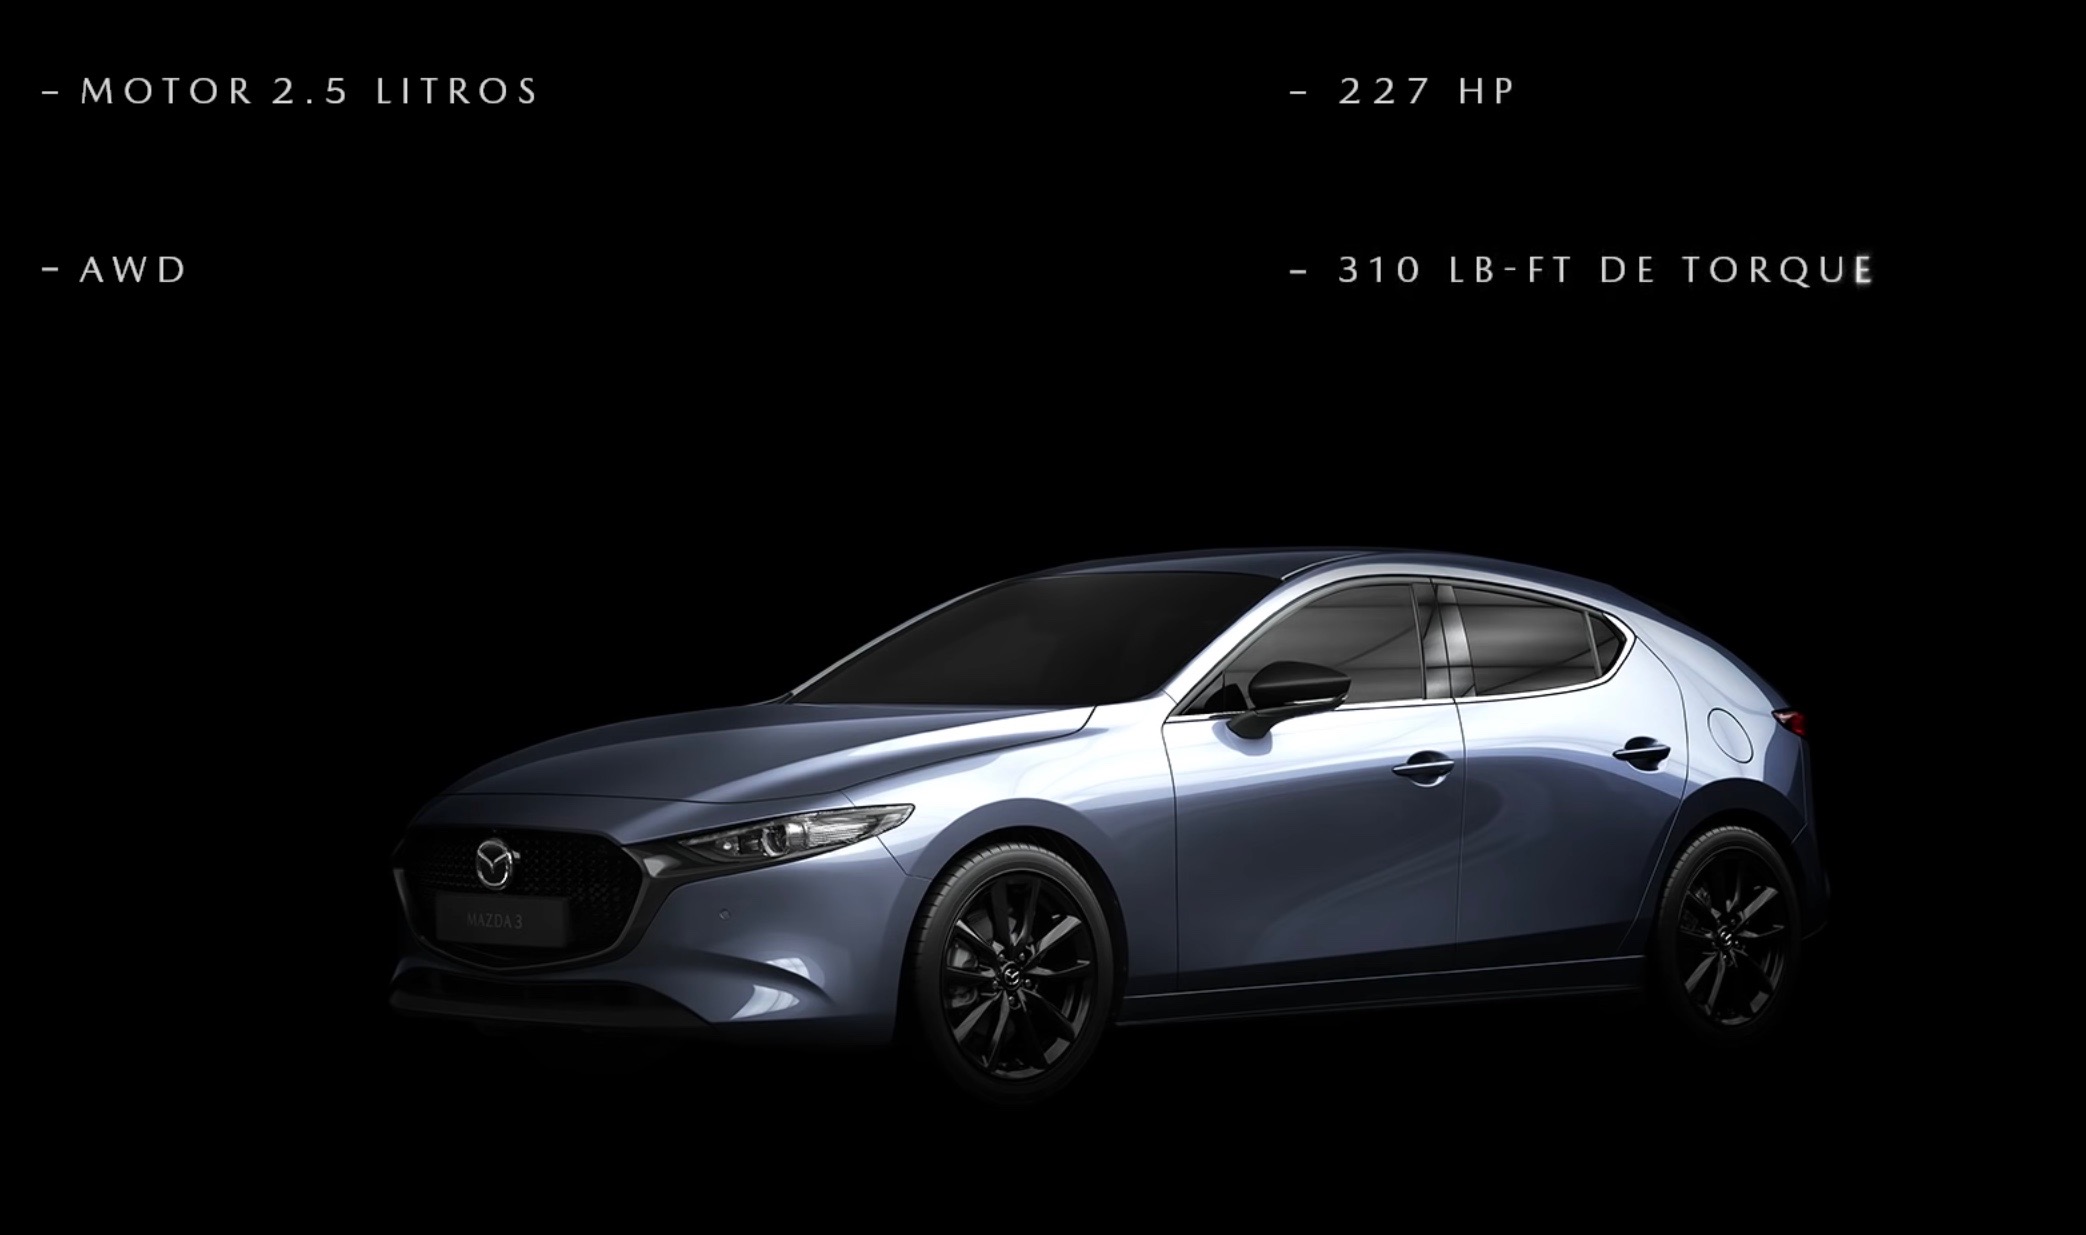 2020 Mazda3 turbo confirmed, gets 2.5T with 170kW